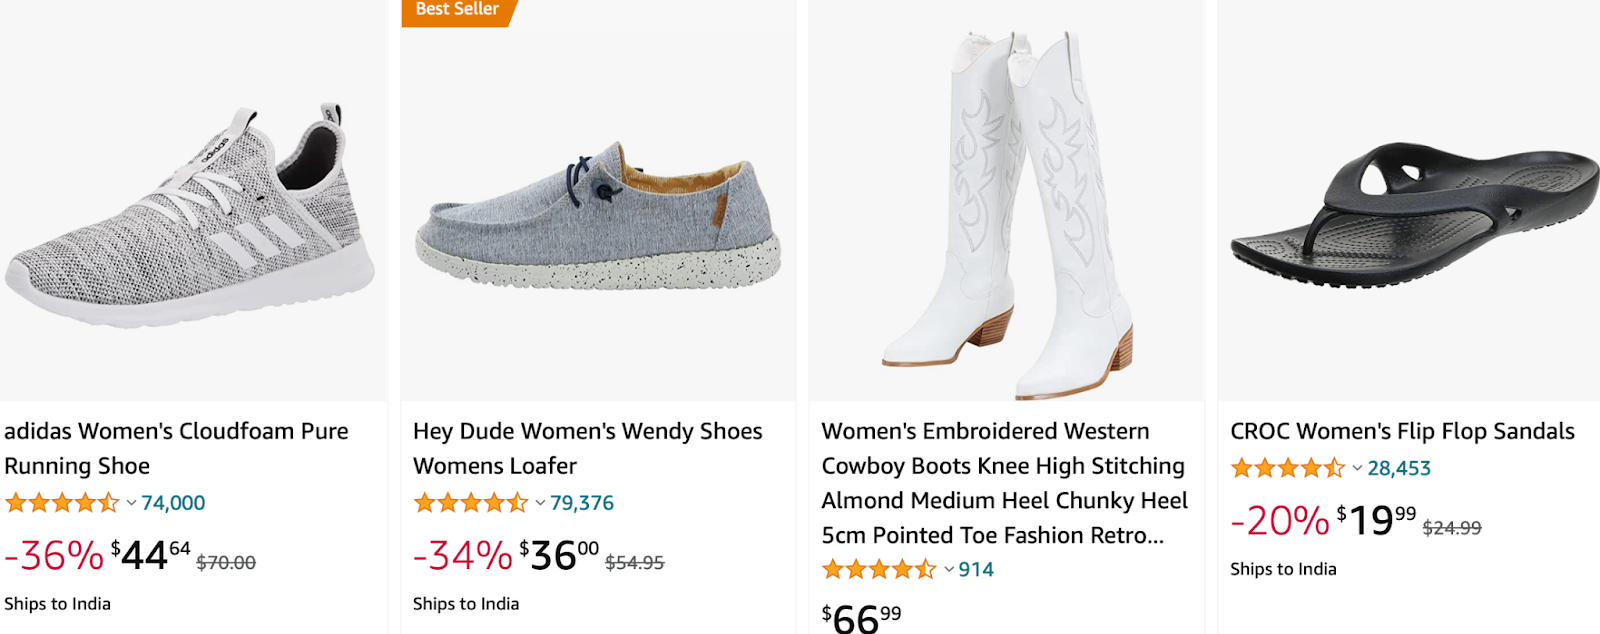 competitor-based pricing example on Amazon